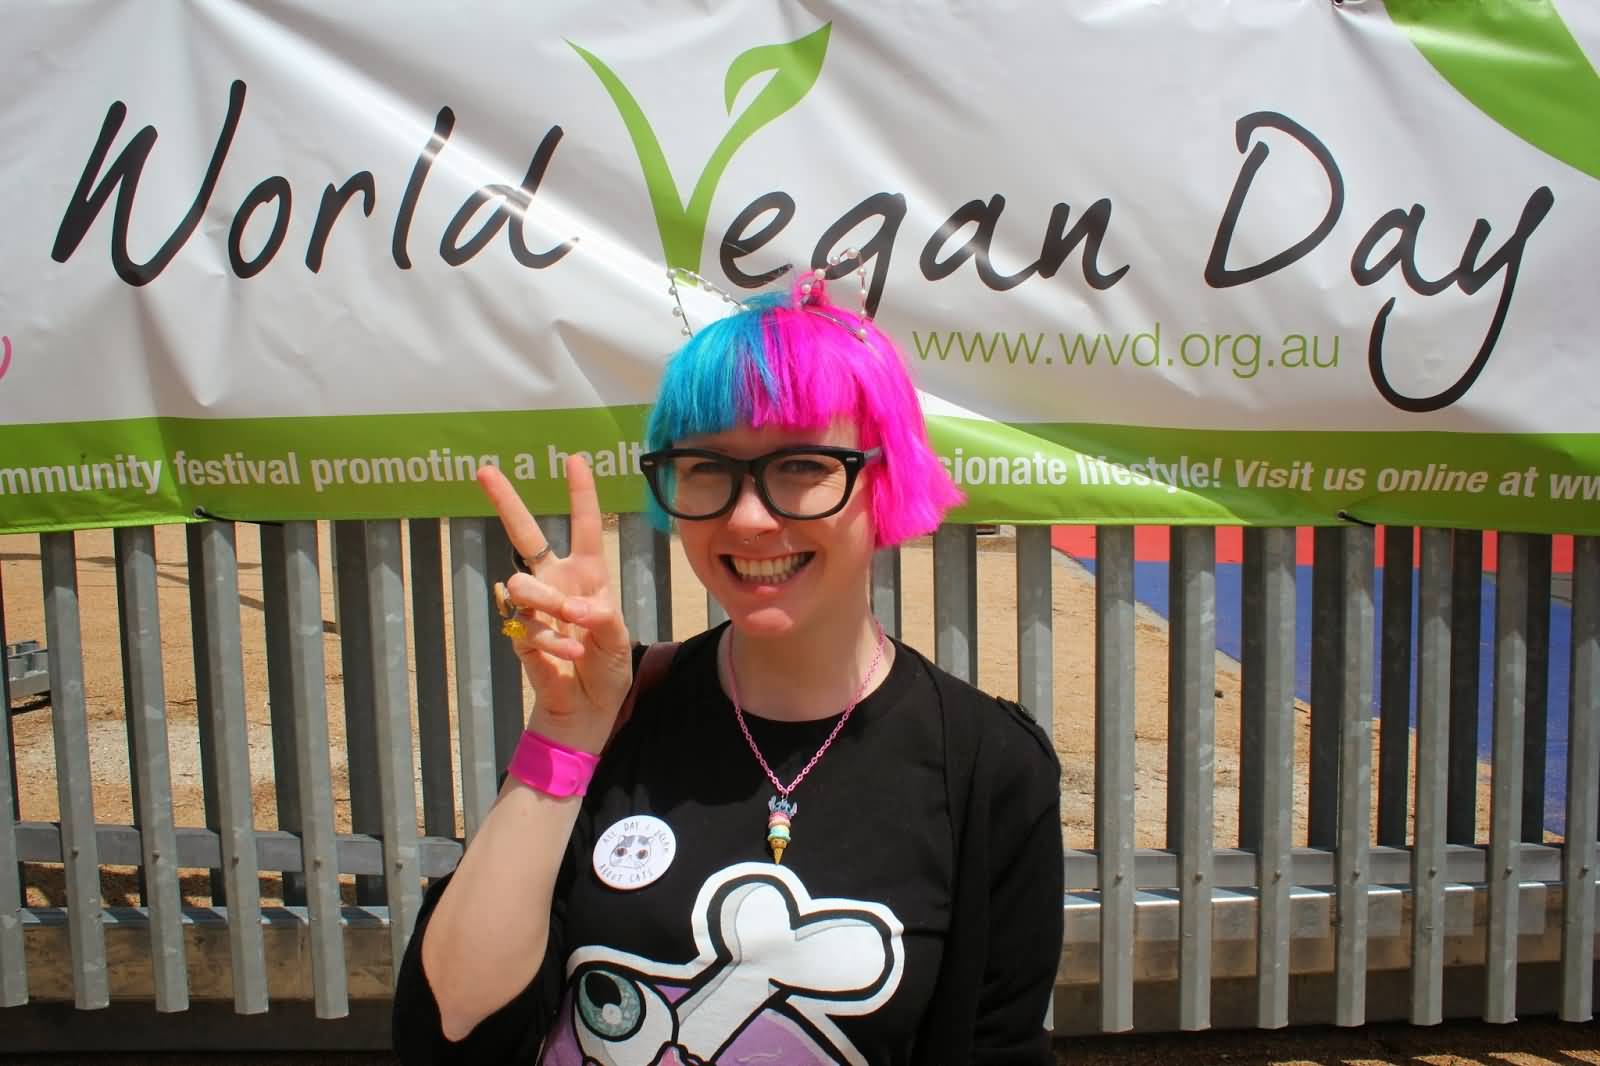 Girl With Colorful Hairs Wishing You World Vegan Day